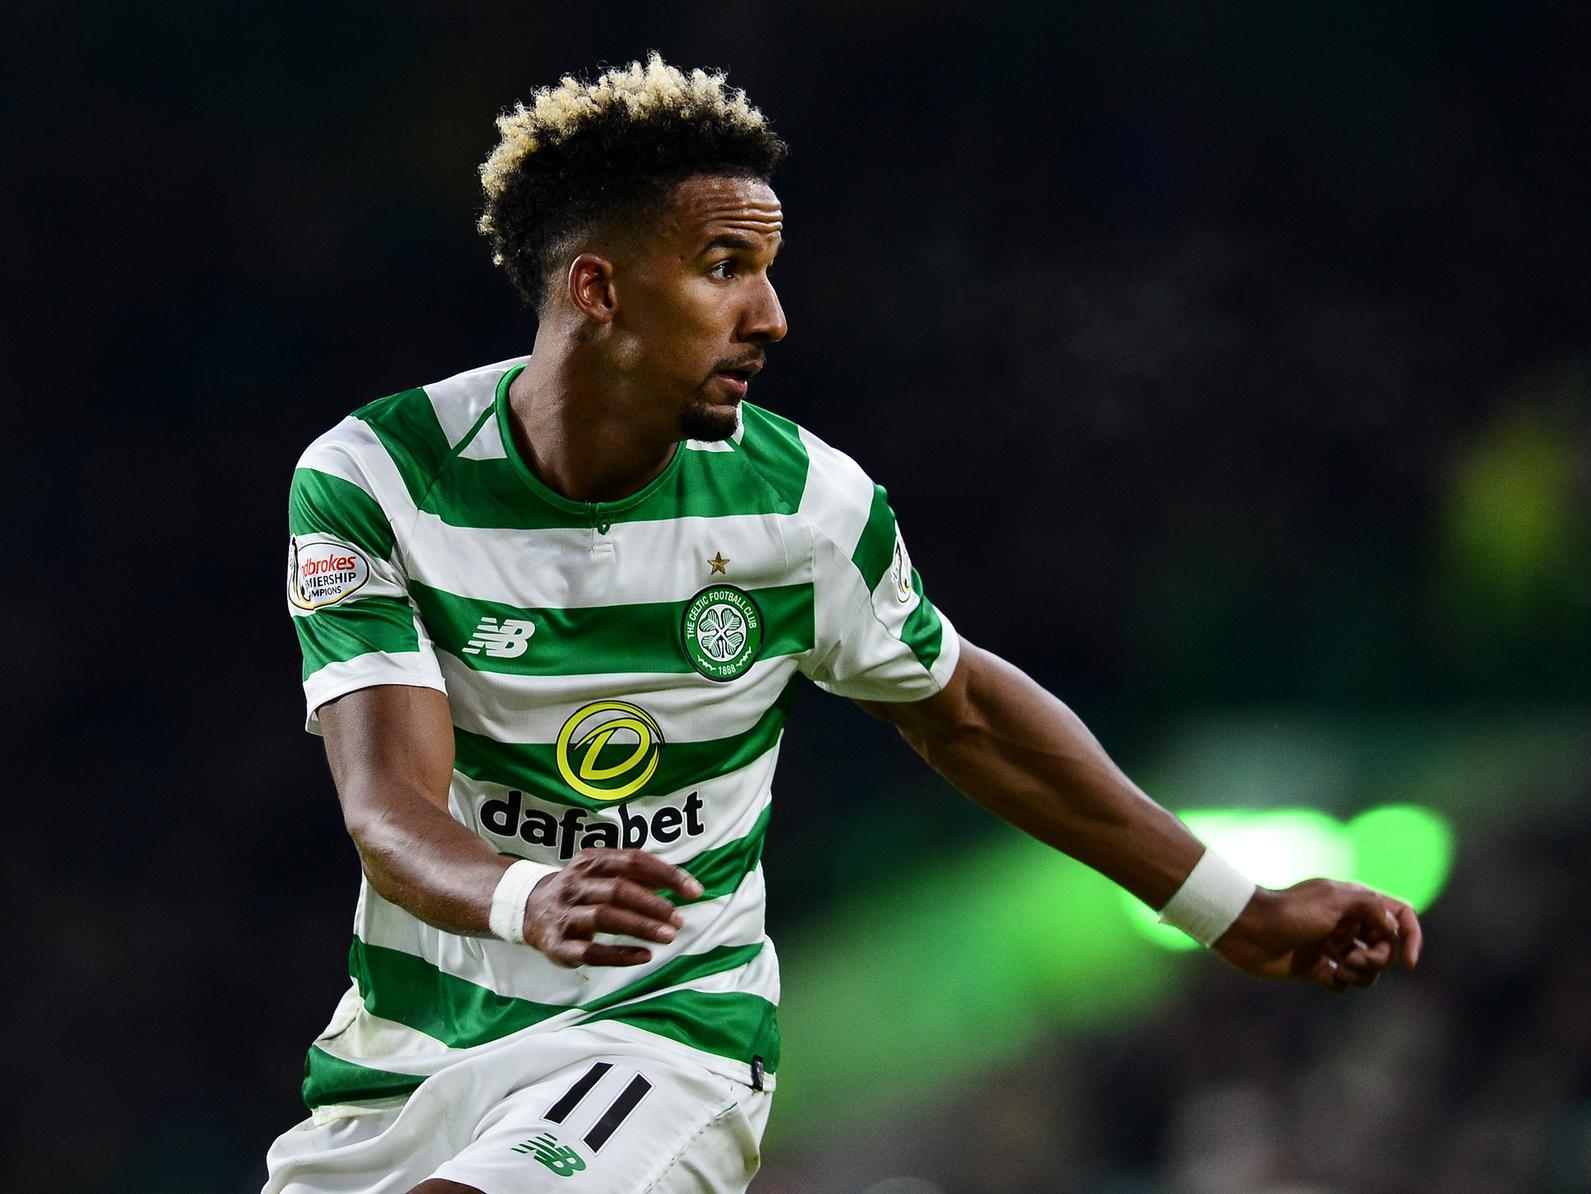 Preston North End are understood to be closing in on Celtic forward Scott Sinclair, who scored sixty goals in his first three seasons with the Scottish giants. (Daily Record)